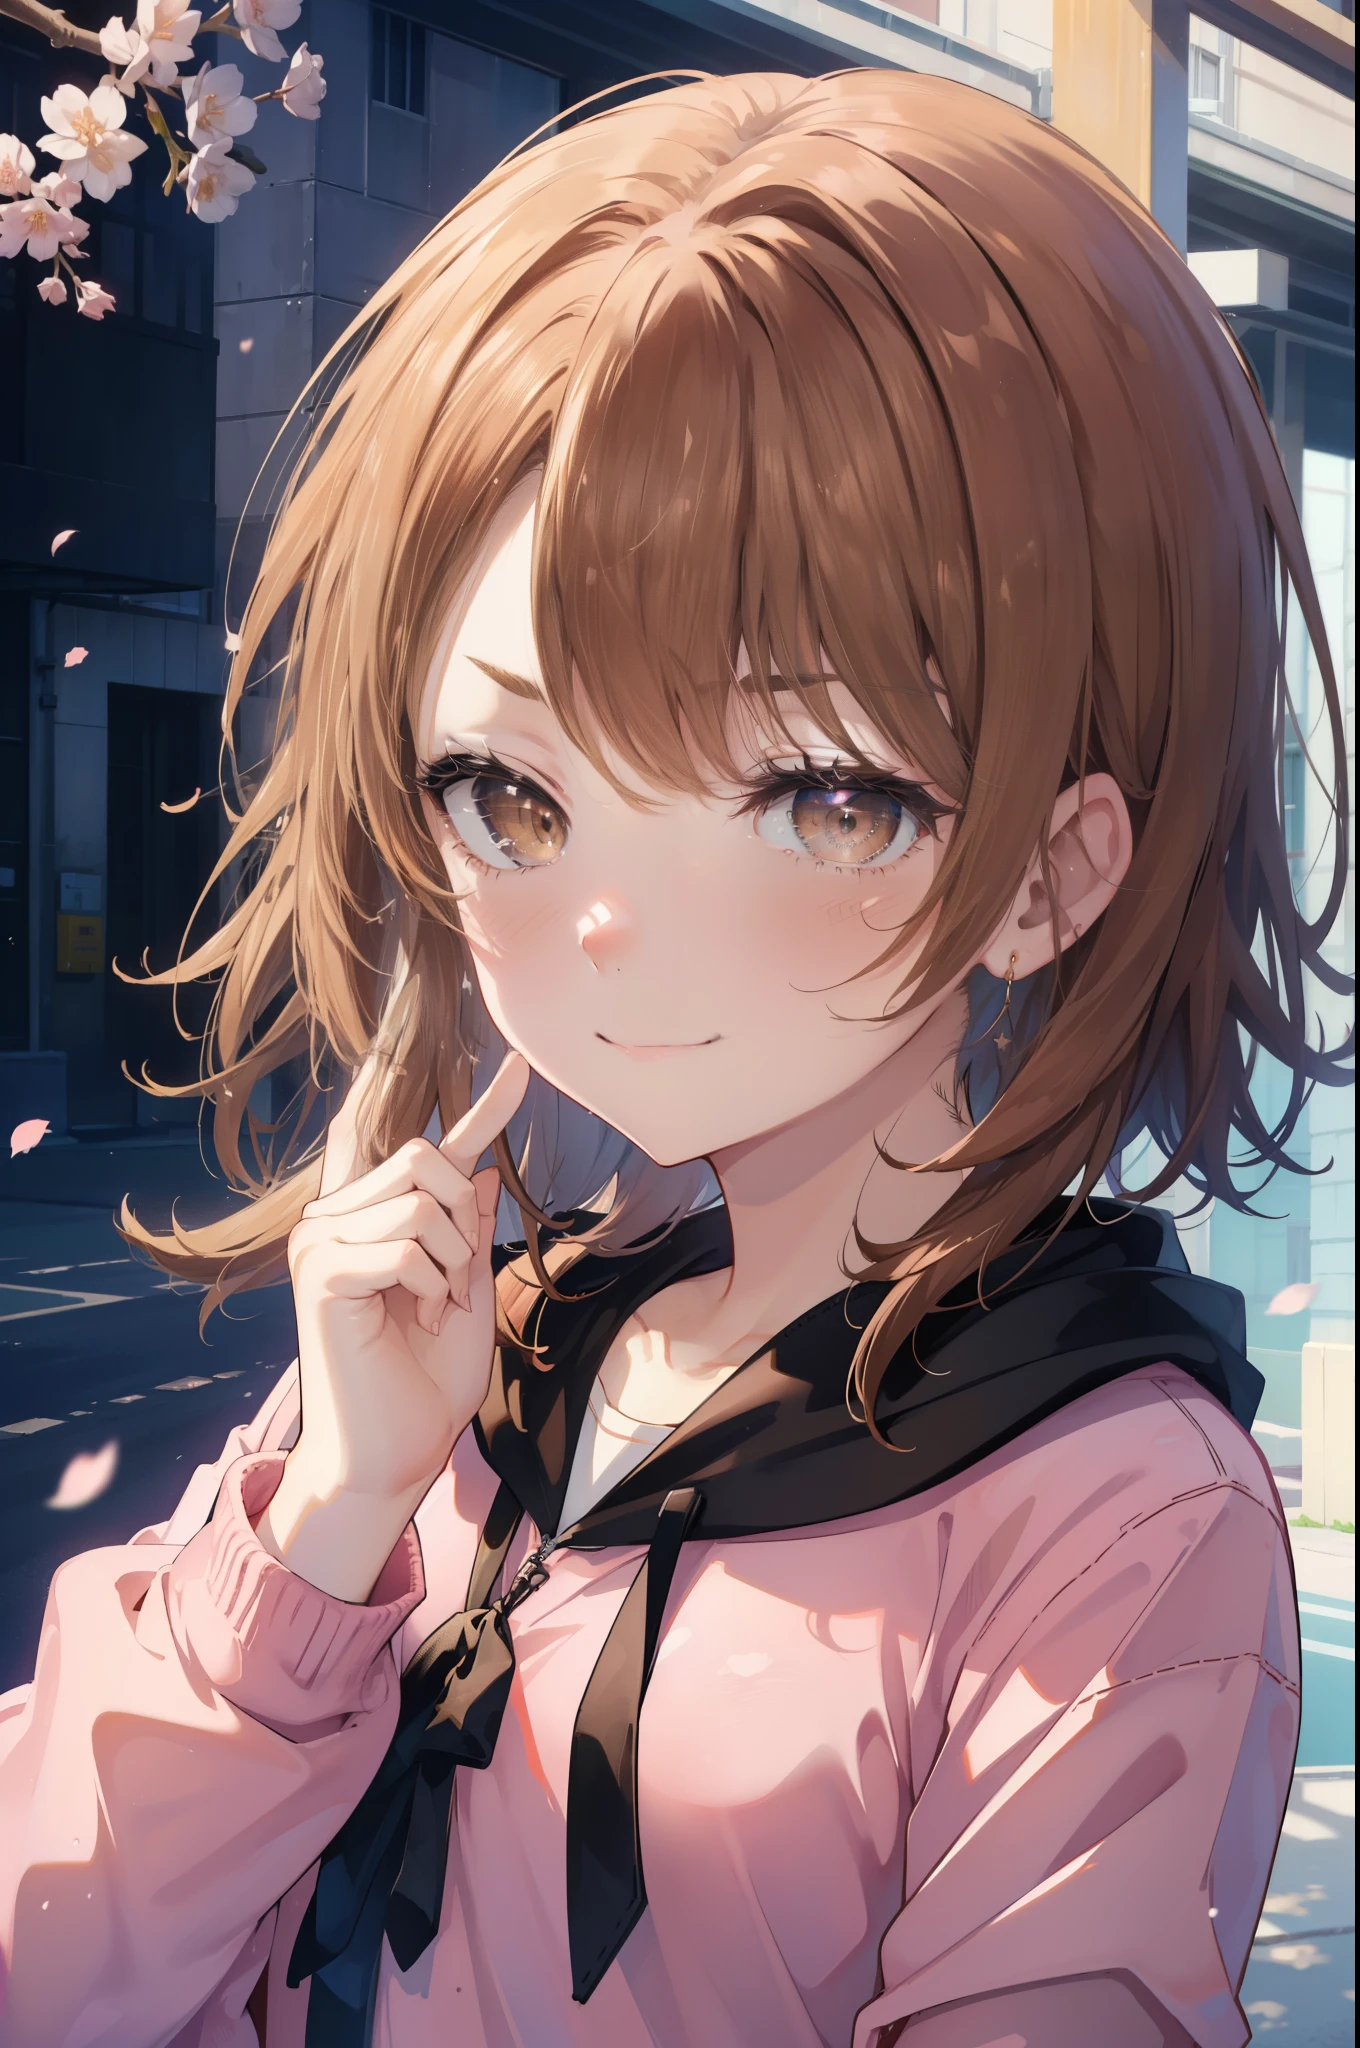 irohaisshiki, iroha isshiki, long hair, brown hair, (brown eyes:1.5), happy smile, smile, open your mouth,Put your hand over your mouth and make a peace sign, 1 girl,towards the camera,pink hoodie,short denim pants,black tights,short boots,standing alone&#39;my back to the wall、The cherry blossoms have bloomed,Cherry blossoms are scattered,
break indoors, Cherry blossom tree-lined path,
break looking at viewer,Upper body,
break (masterpiece:1.2), highest quality, High resolution, unity 8k wallpaper, (shape:0.8), (fine and beautiful eyes:1.6), highly detailed face, perfect lighting, Very detailed CG, (perfect hands, perfect anatomy),